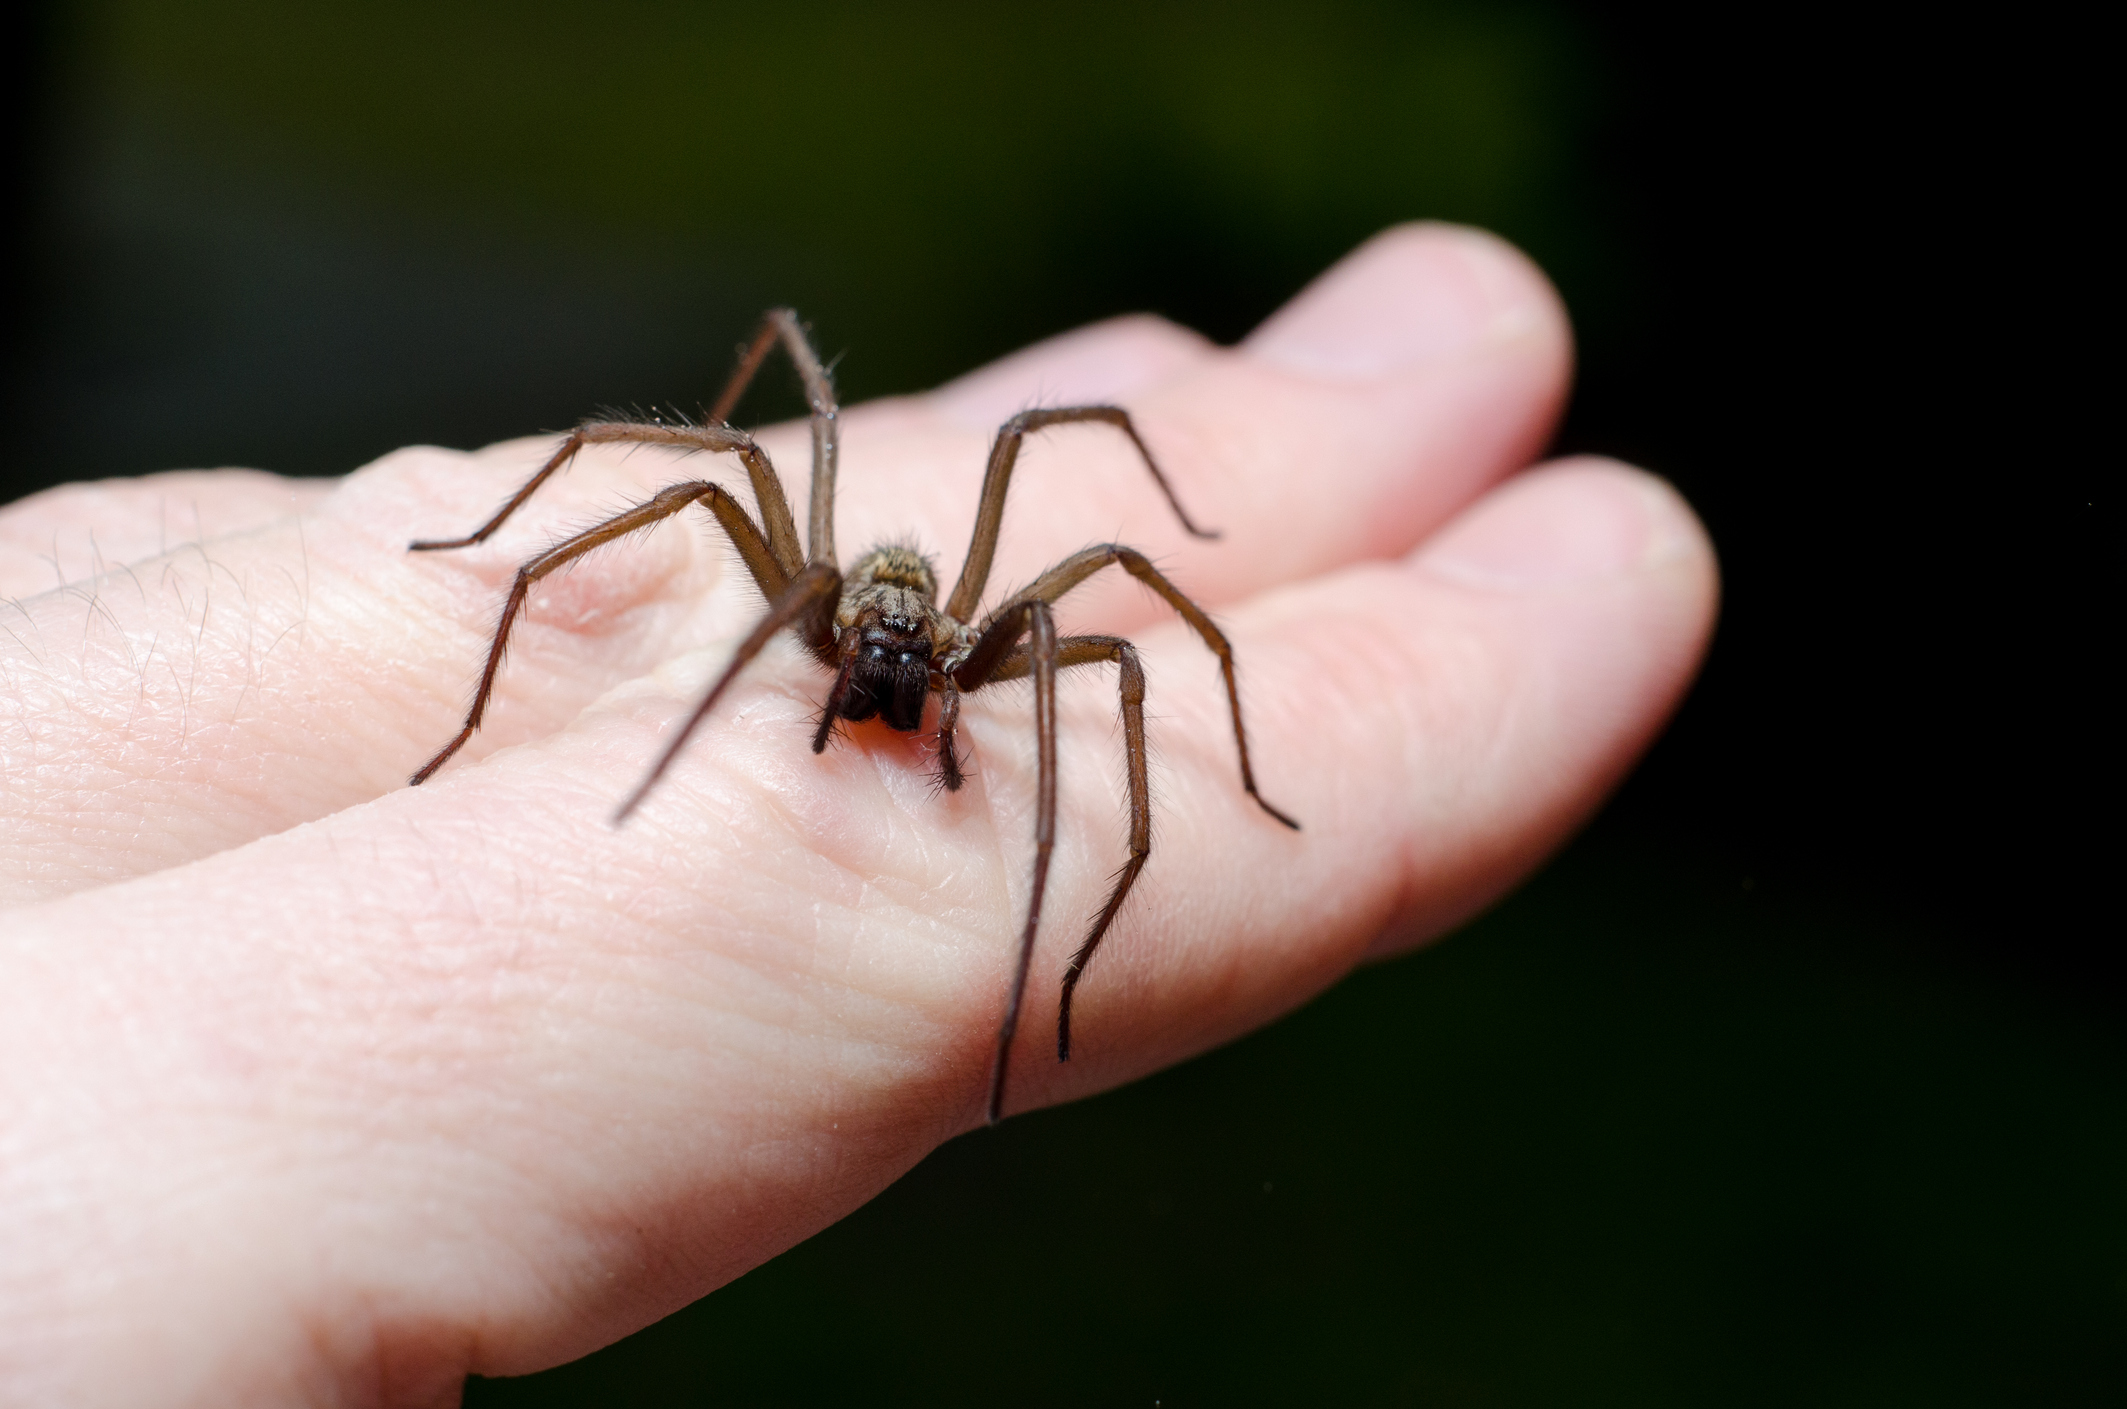 What are the Symptoms of Spider Bite and the Treatment for Spider Bite?